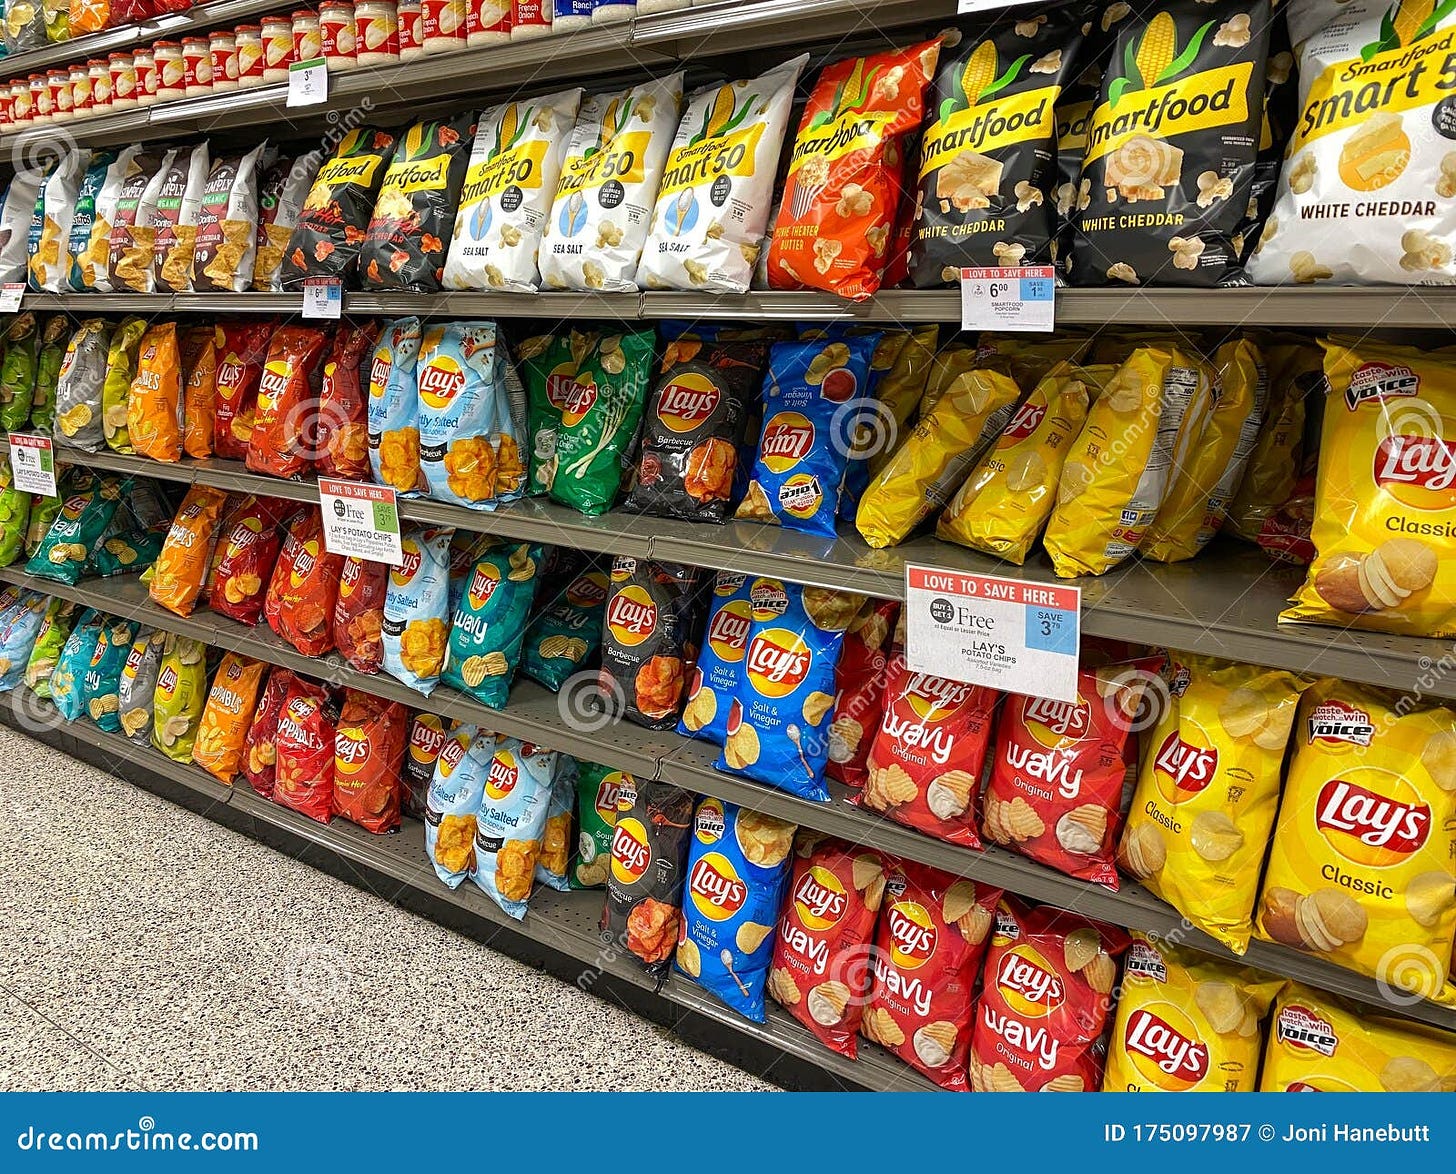 A display of Lays potato chips on a display shelf of a Publix Grocery Store